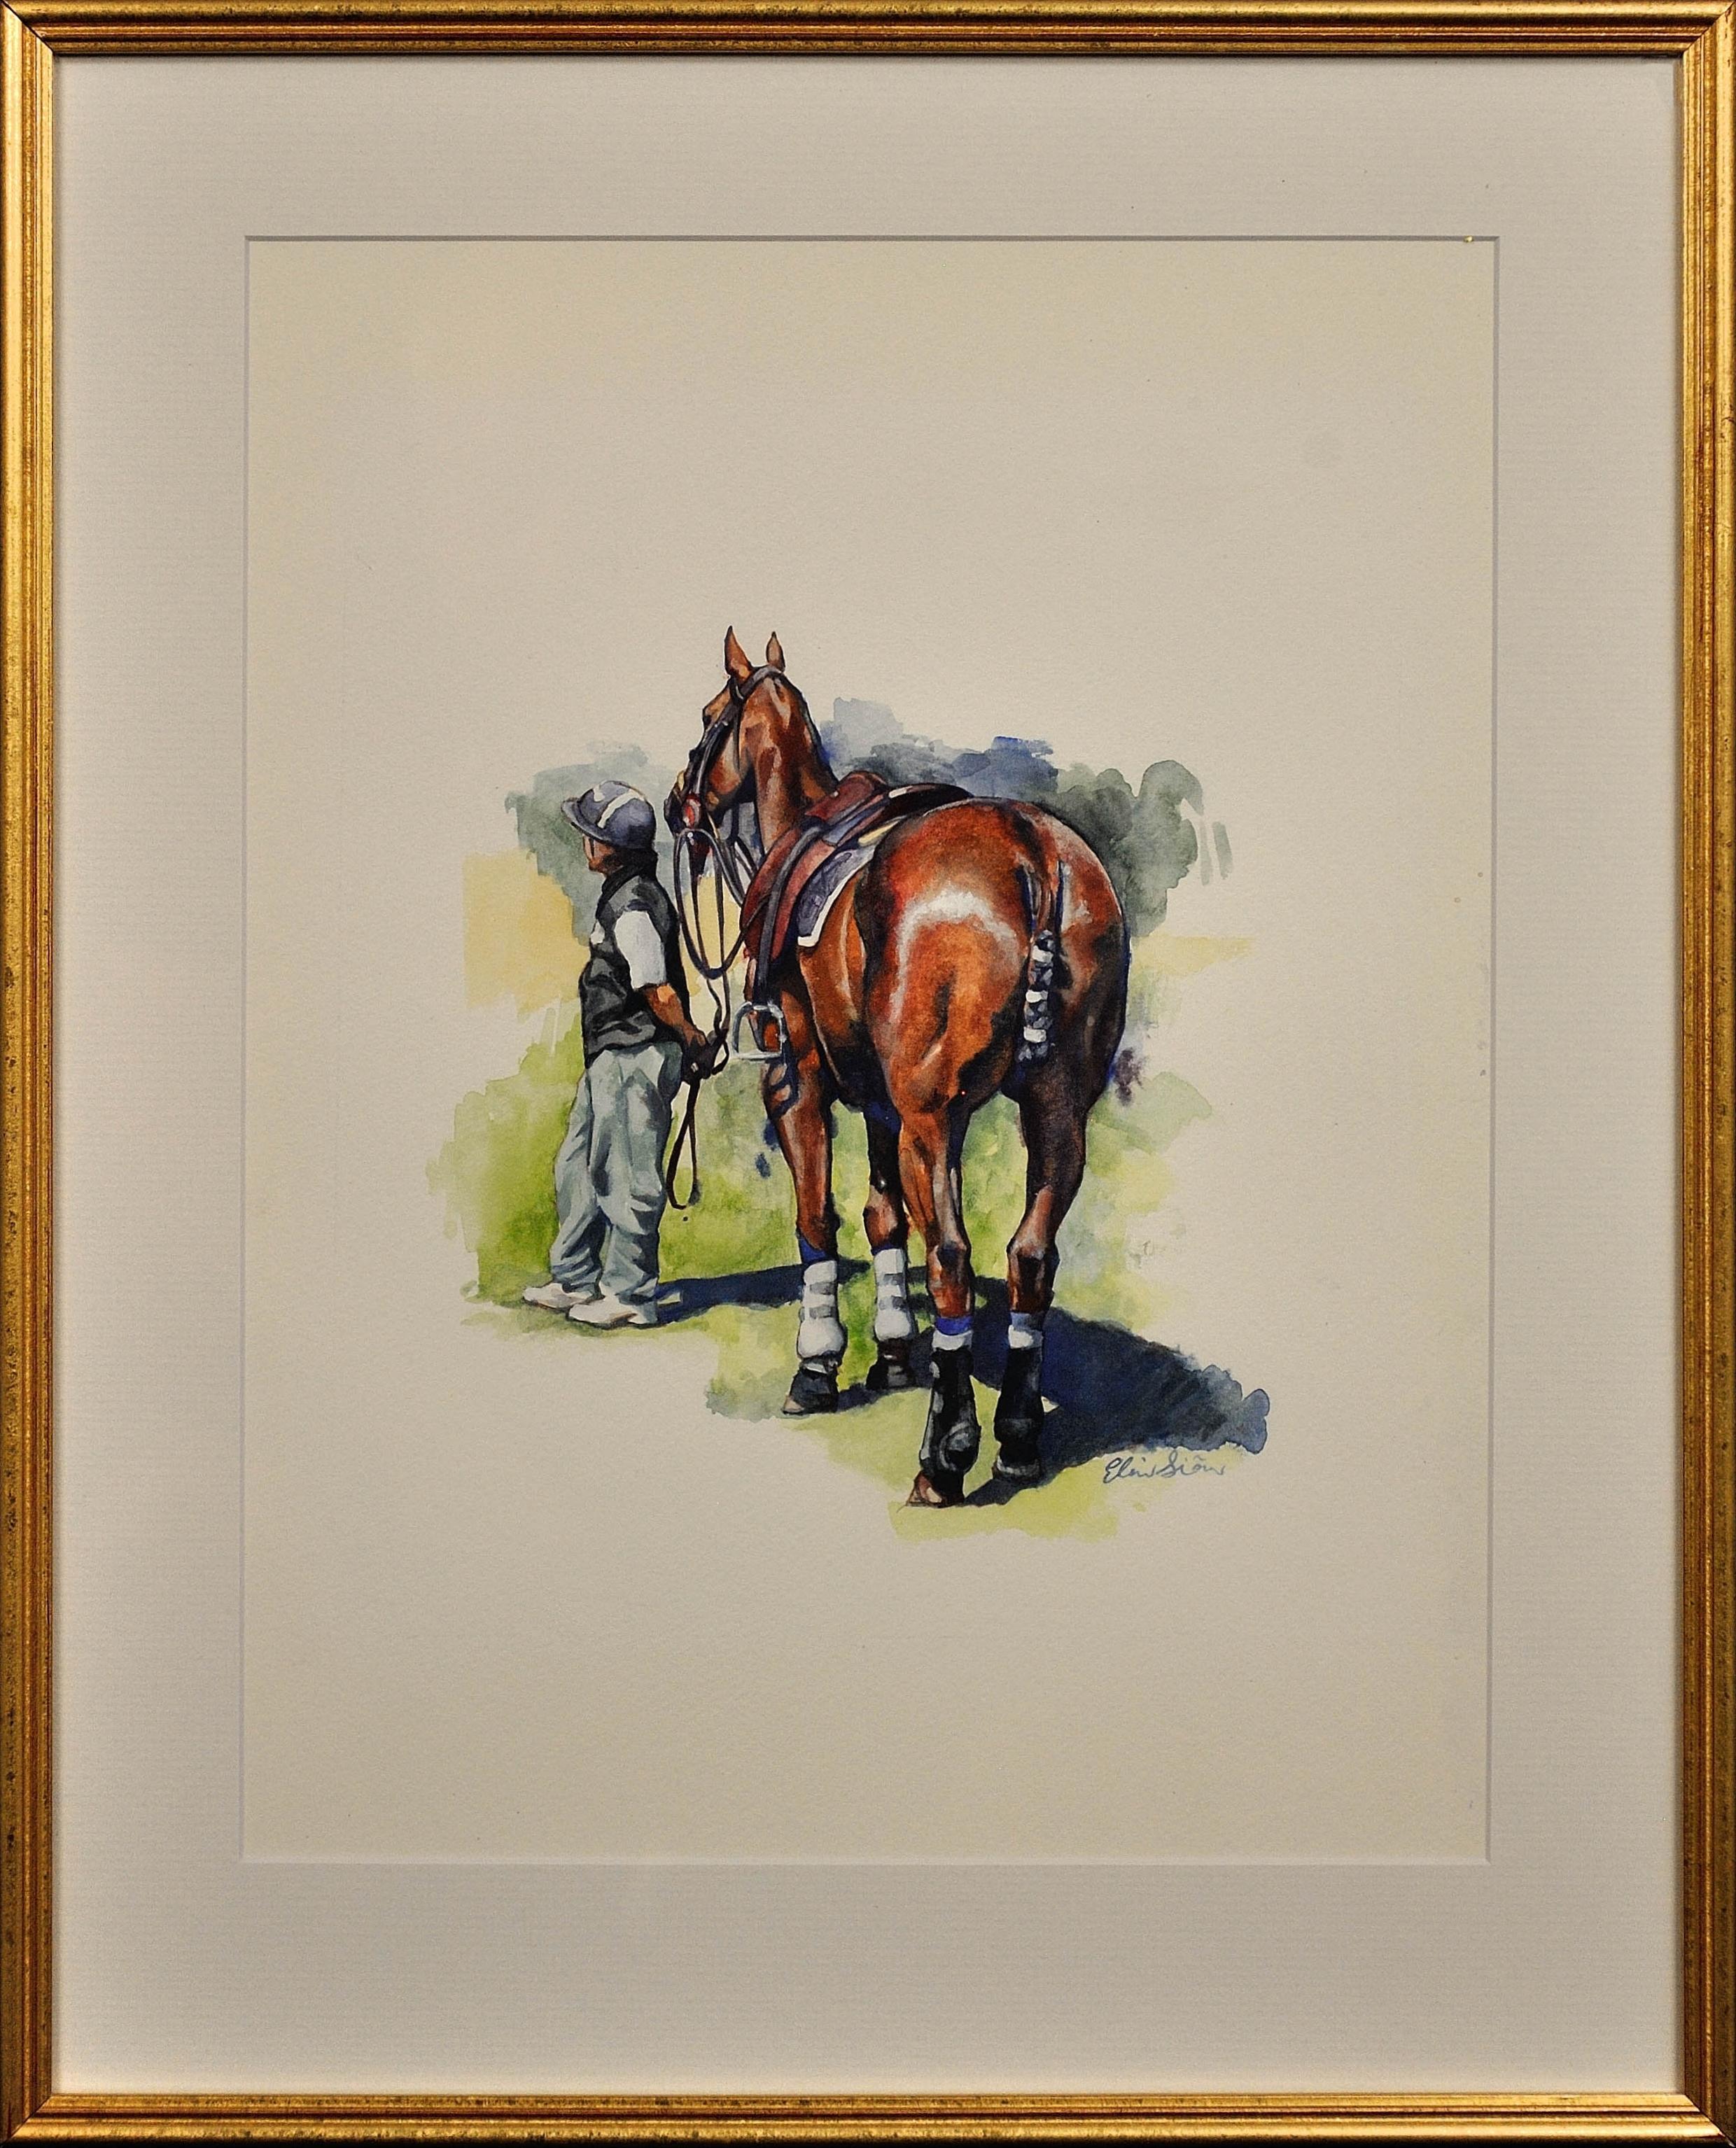 Elin Sian Blake Animal Art - Polo Match, Cirencester, Player and Pony. Cotswolds. Parkland. Framed Watercolor